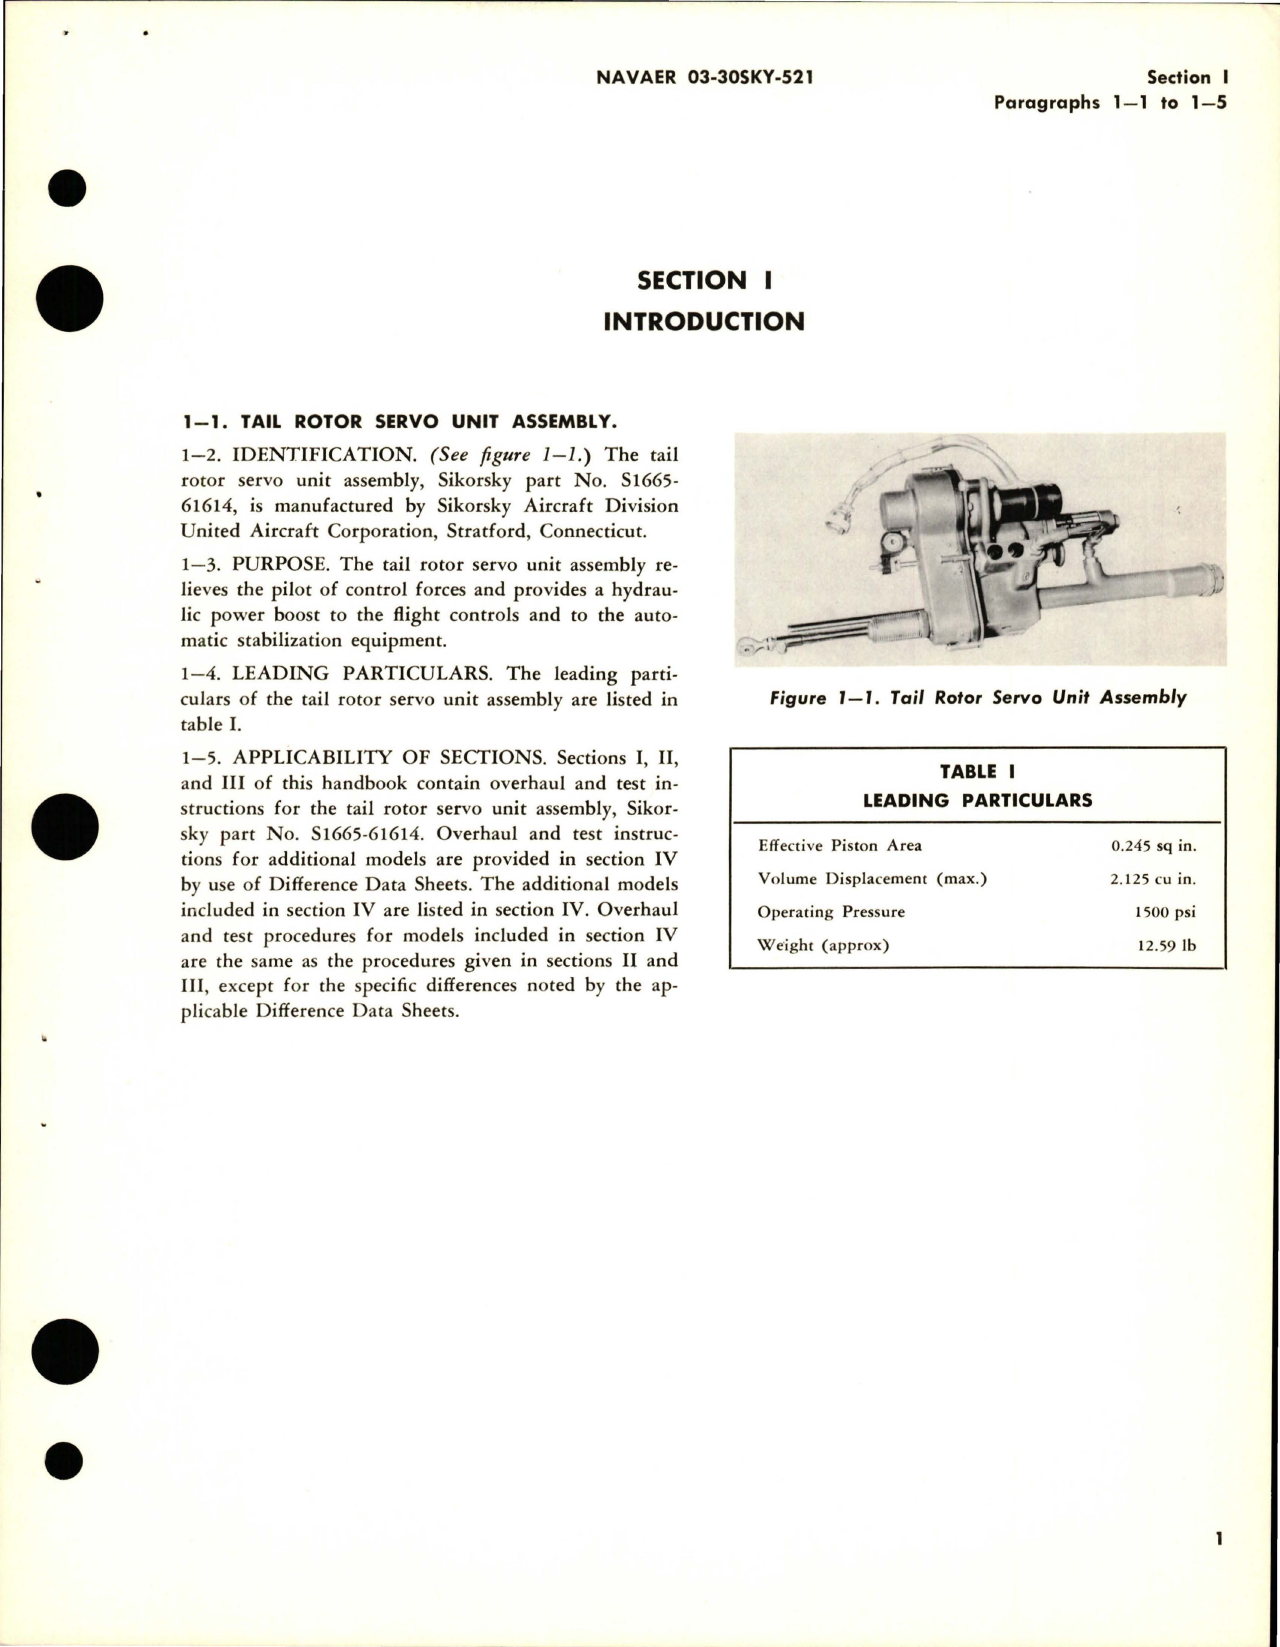 Sample page 5 from AirCorps Library document: Overhaul Instructions for Tail Rotor Servo Unit Assembly - Parts S1665-61614, S1665-61614-1, and S1665-61614-4